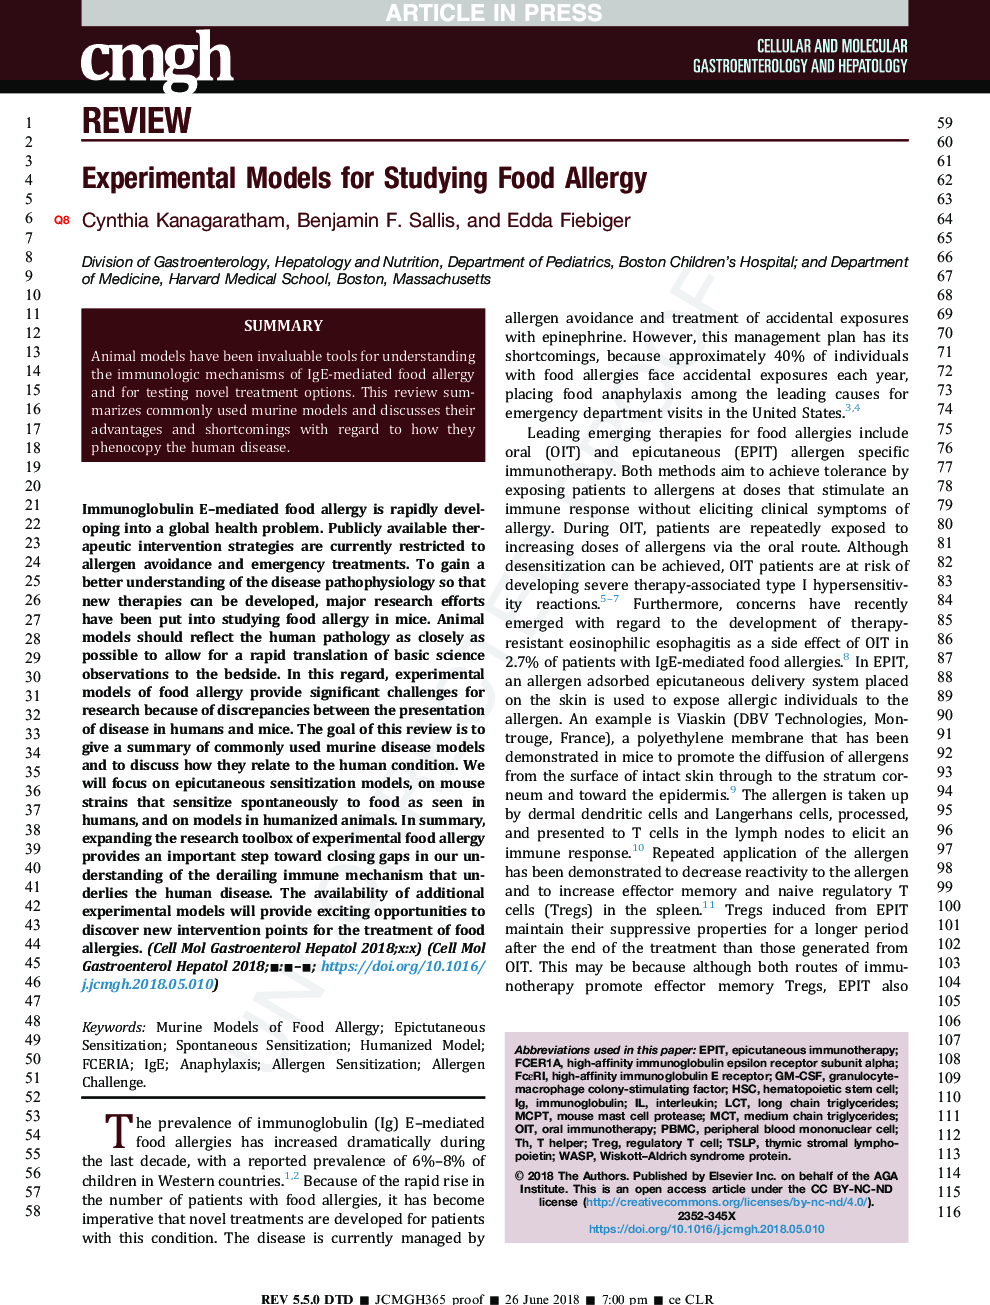 Experimental Models for Studying Food Allergy